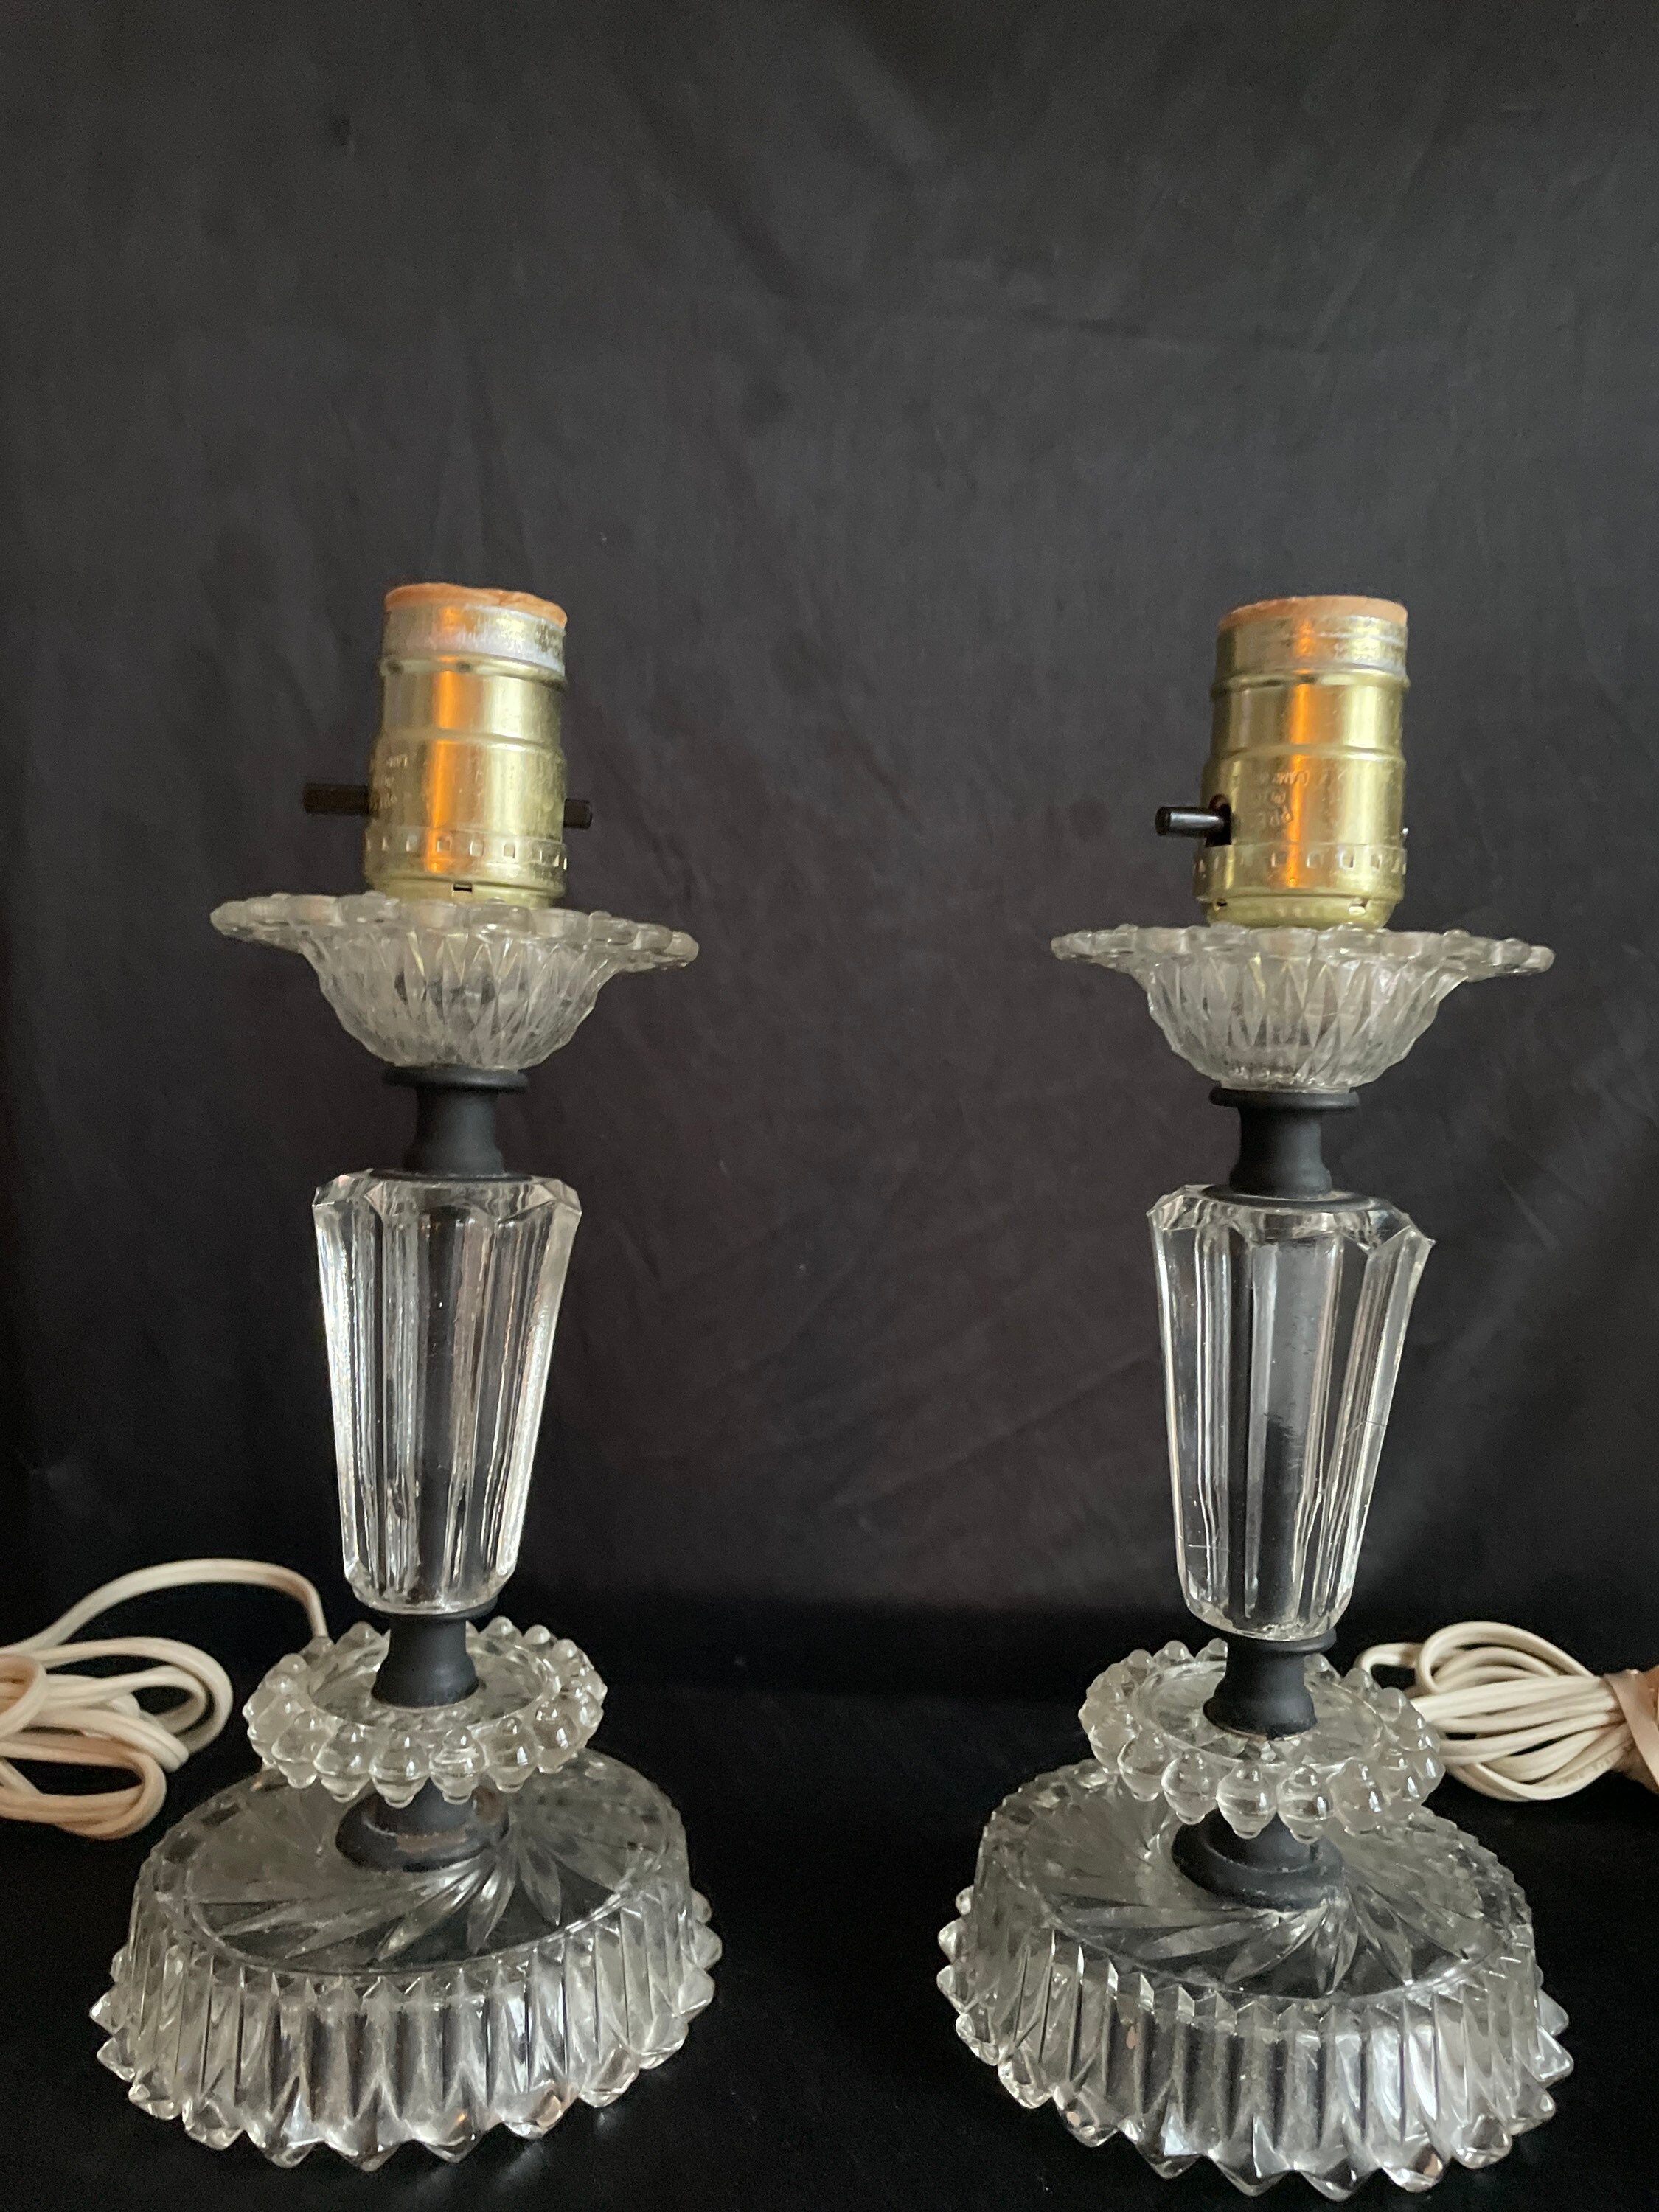 50 Silver Round Floating Candles, Floating Wicks for Oil Lamps, Sabbath Candle  Wicks, String Candle Wick, Oil Lamp, Floating Candlewicks 